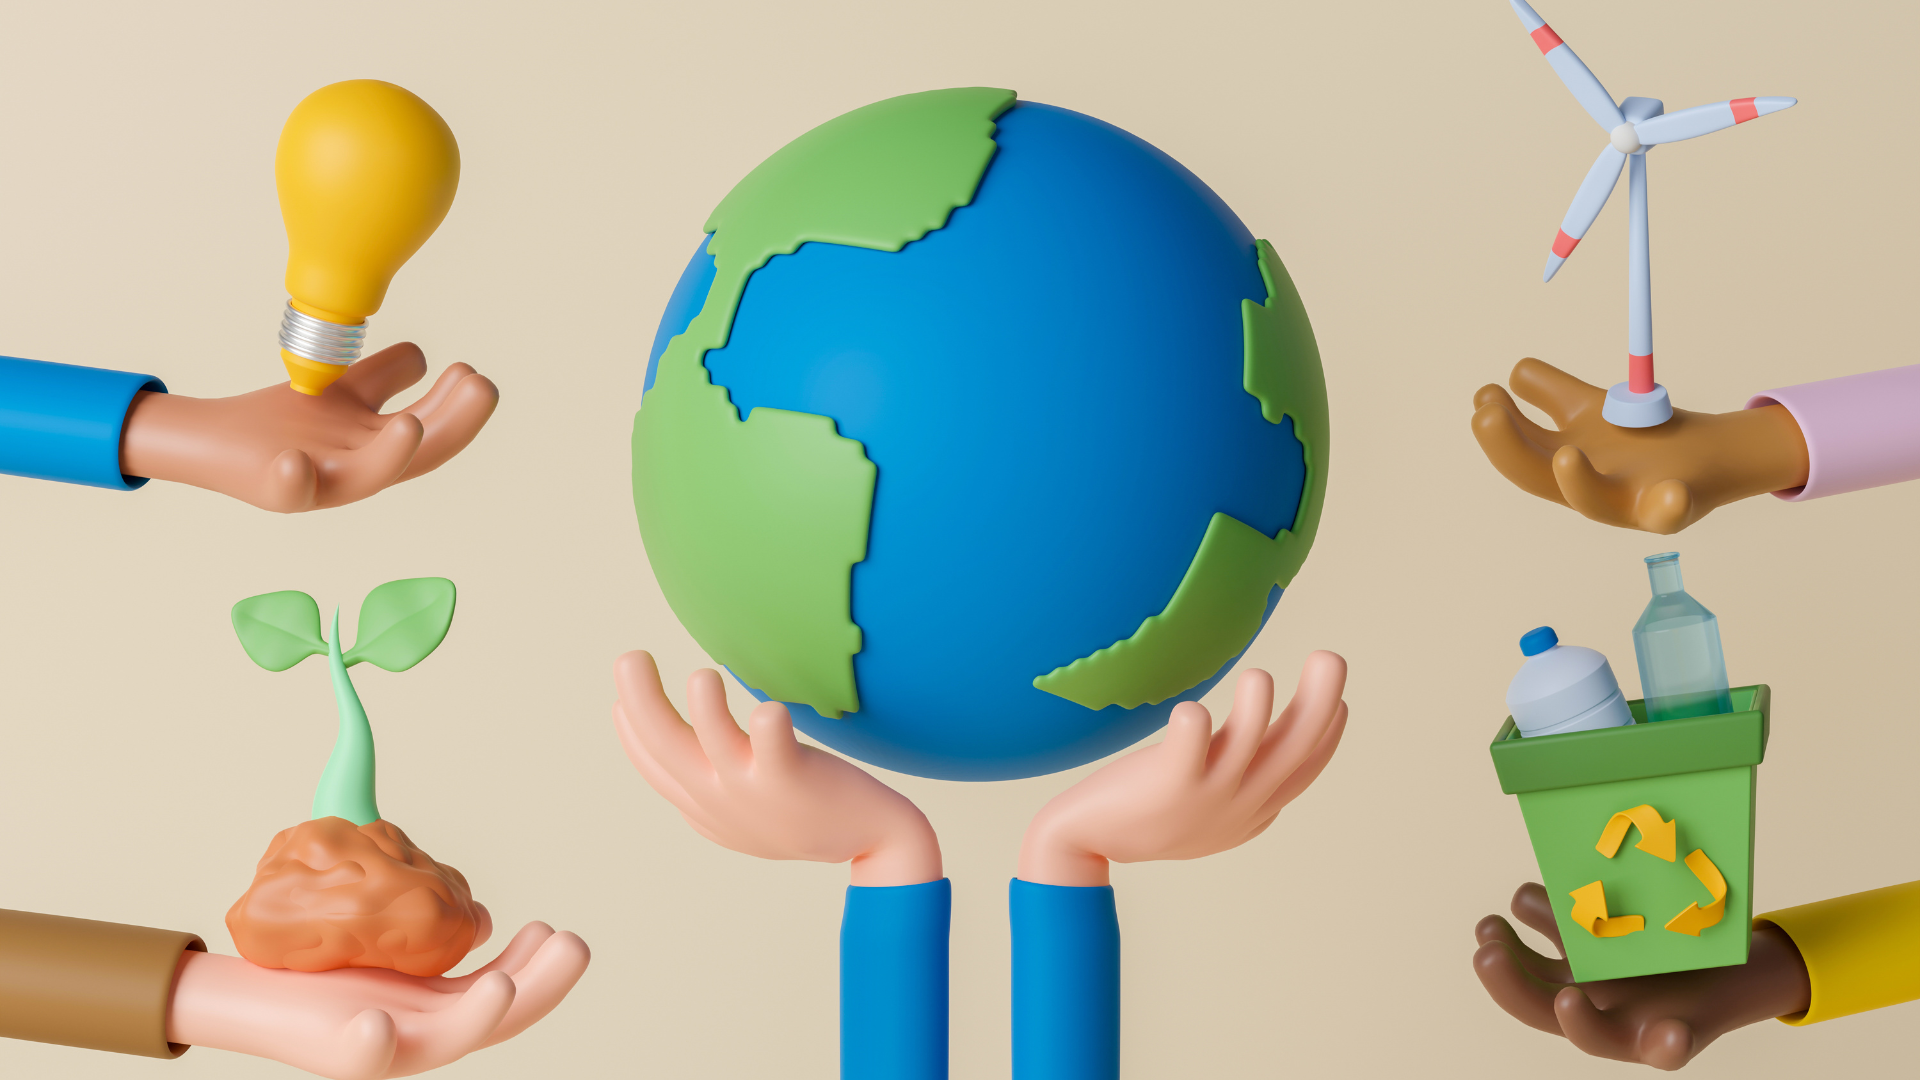 Digitally illustrations of two hands holding up the planet Earth in the center, hands hold a lightbulb and a seedling on the left, and hands holding a windmill and a recycling bin on the right